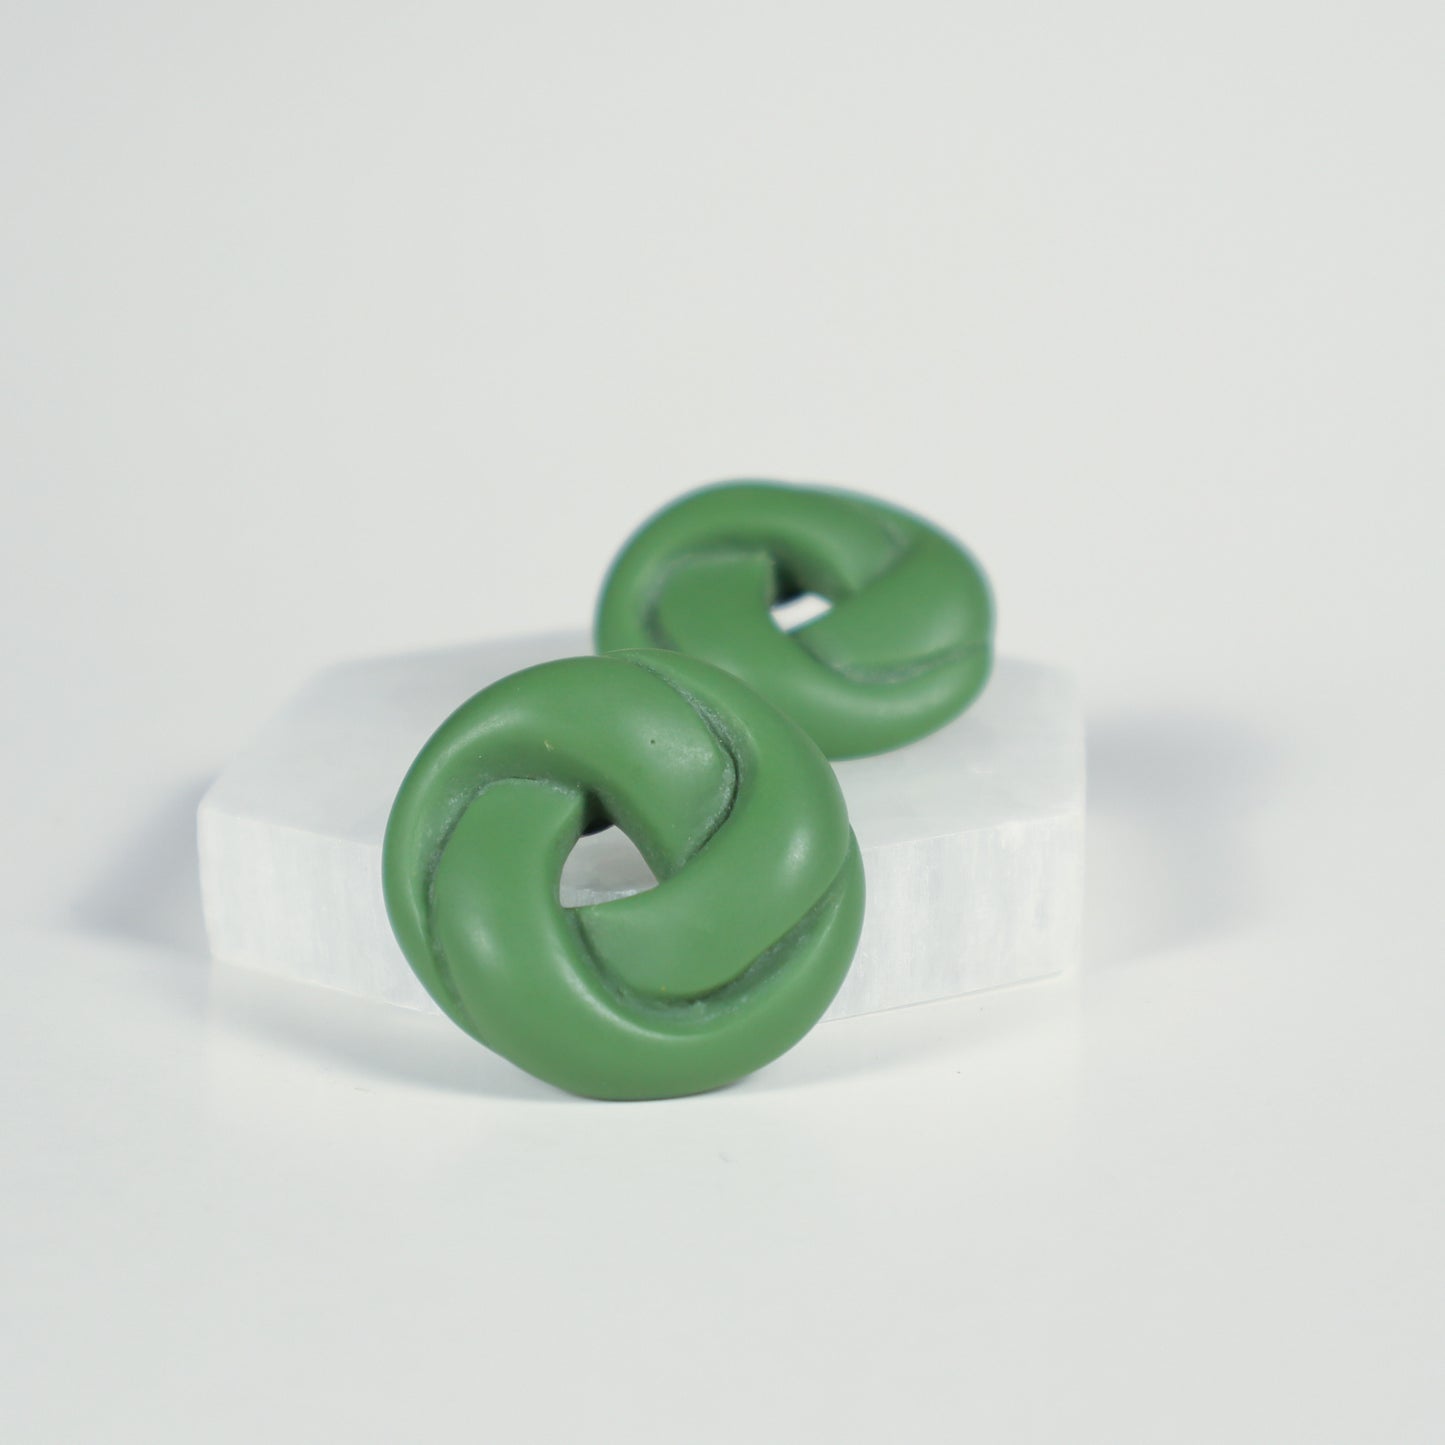 Twisted Spiral Earrings - Sage Green